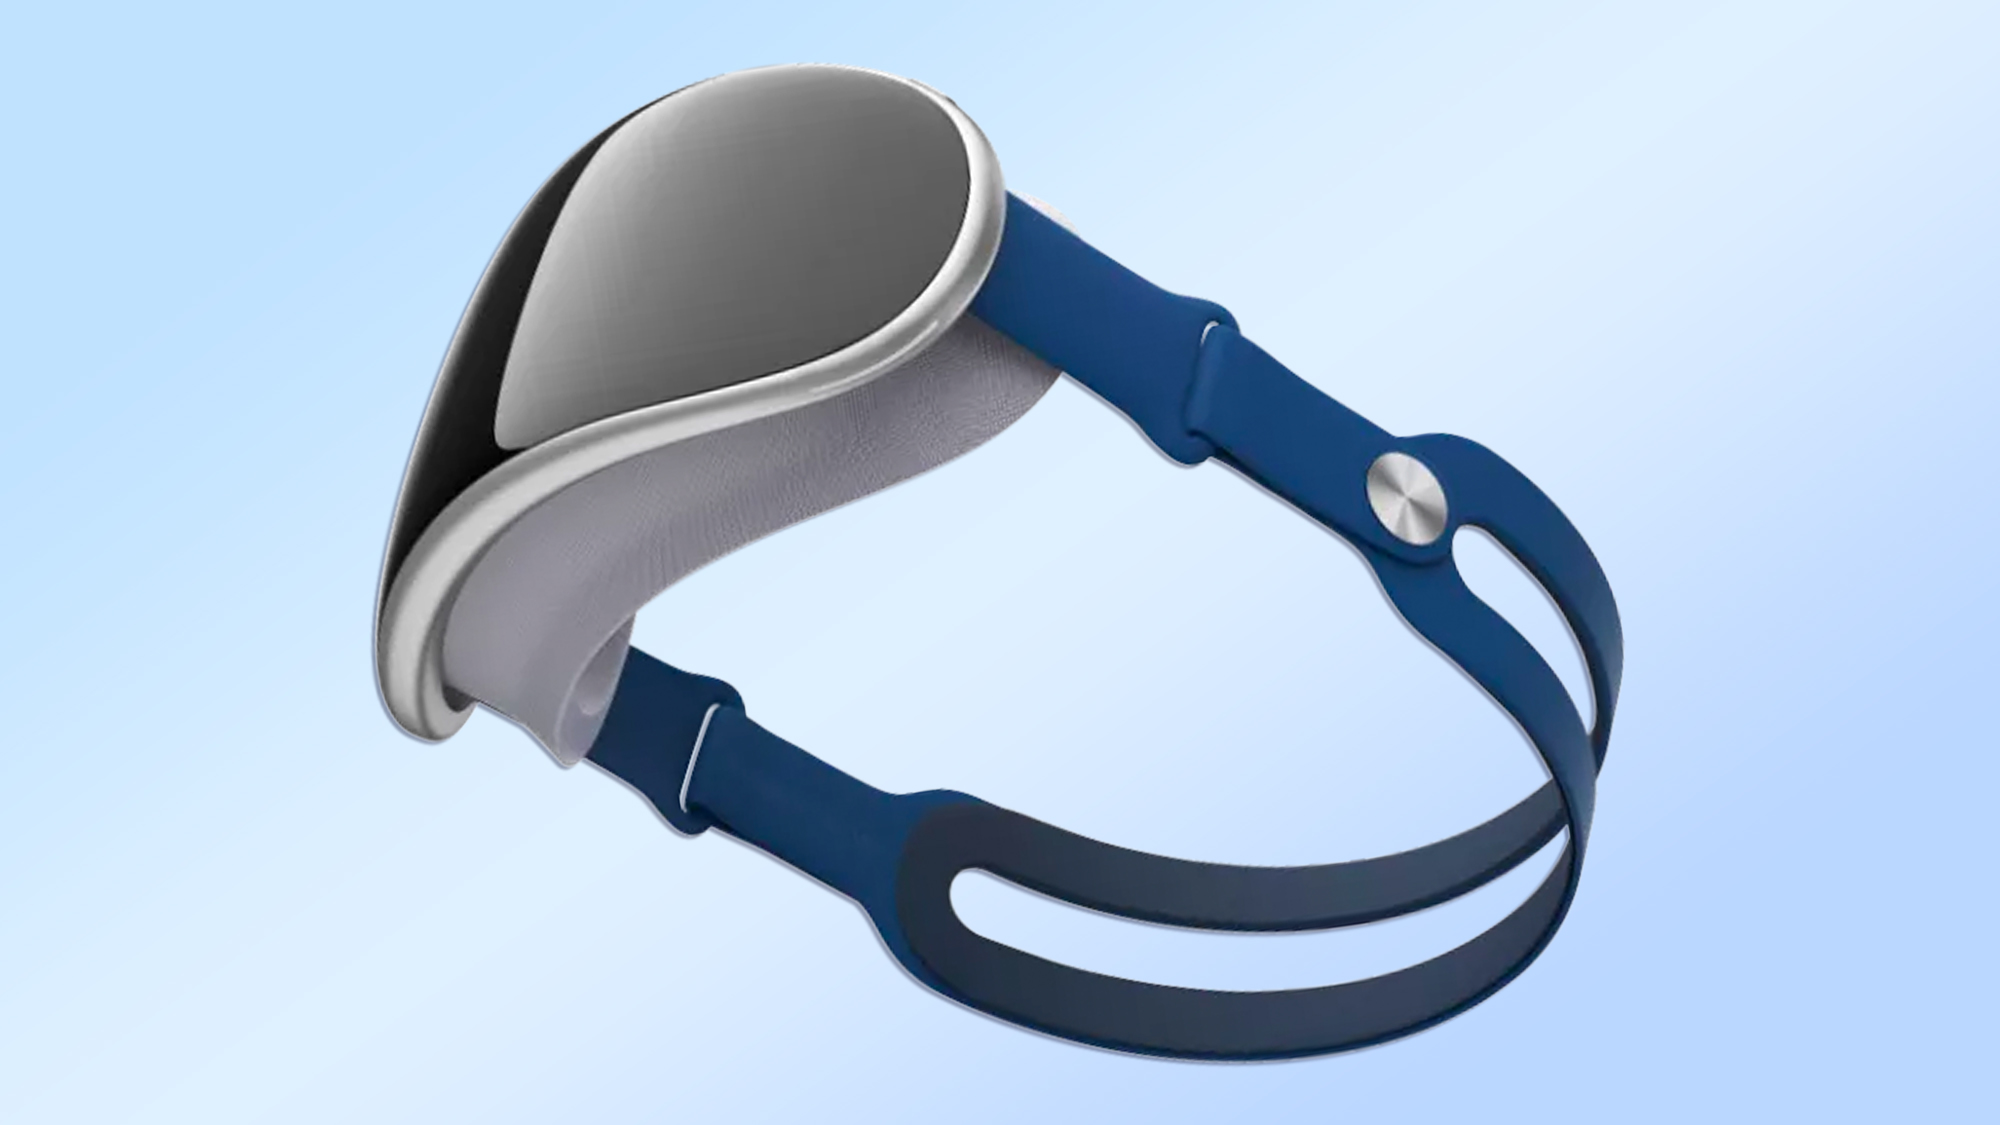 Apple mixed reality headset rendering